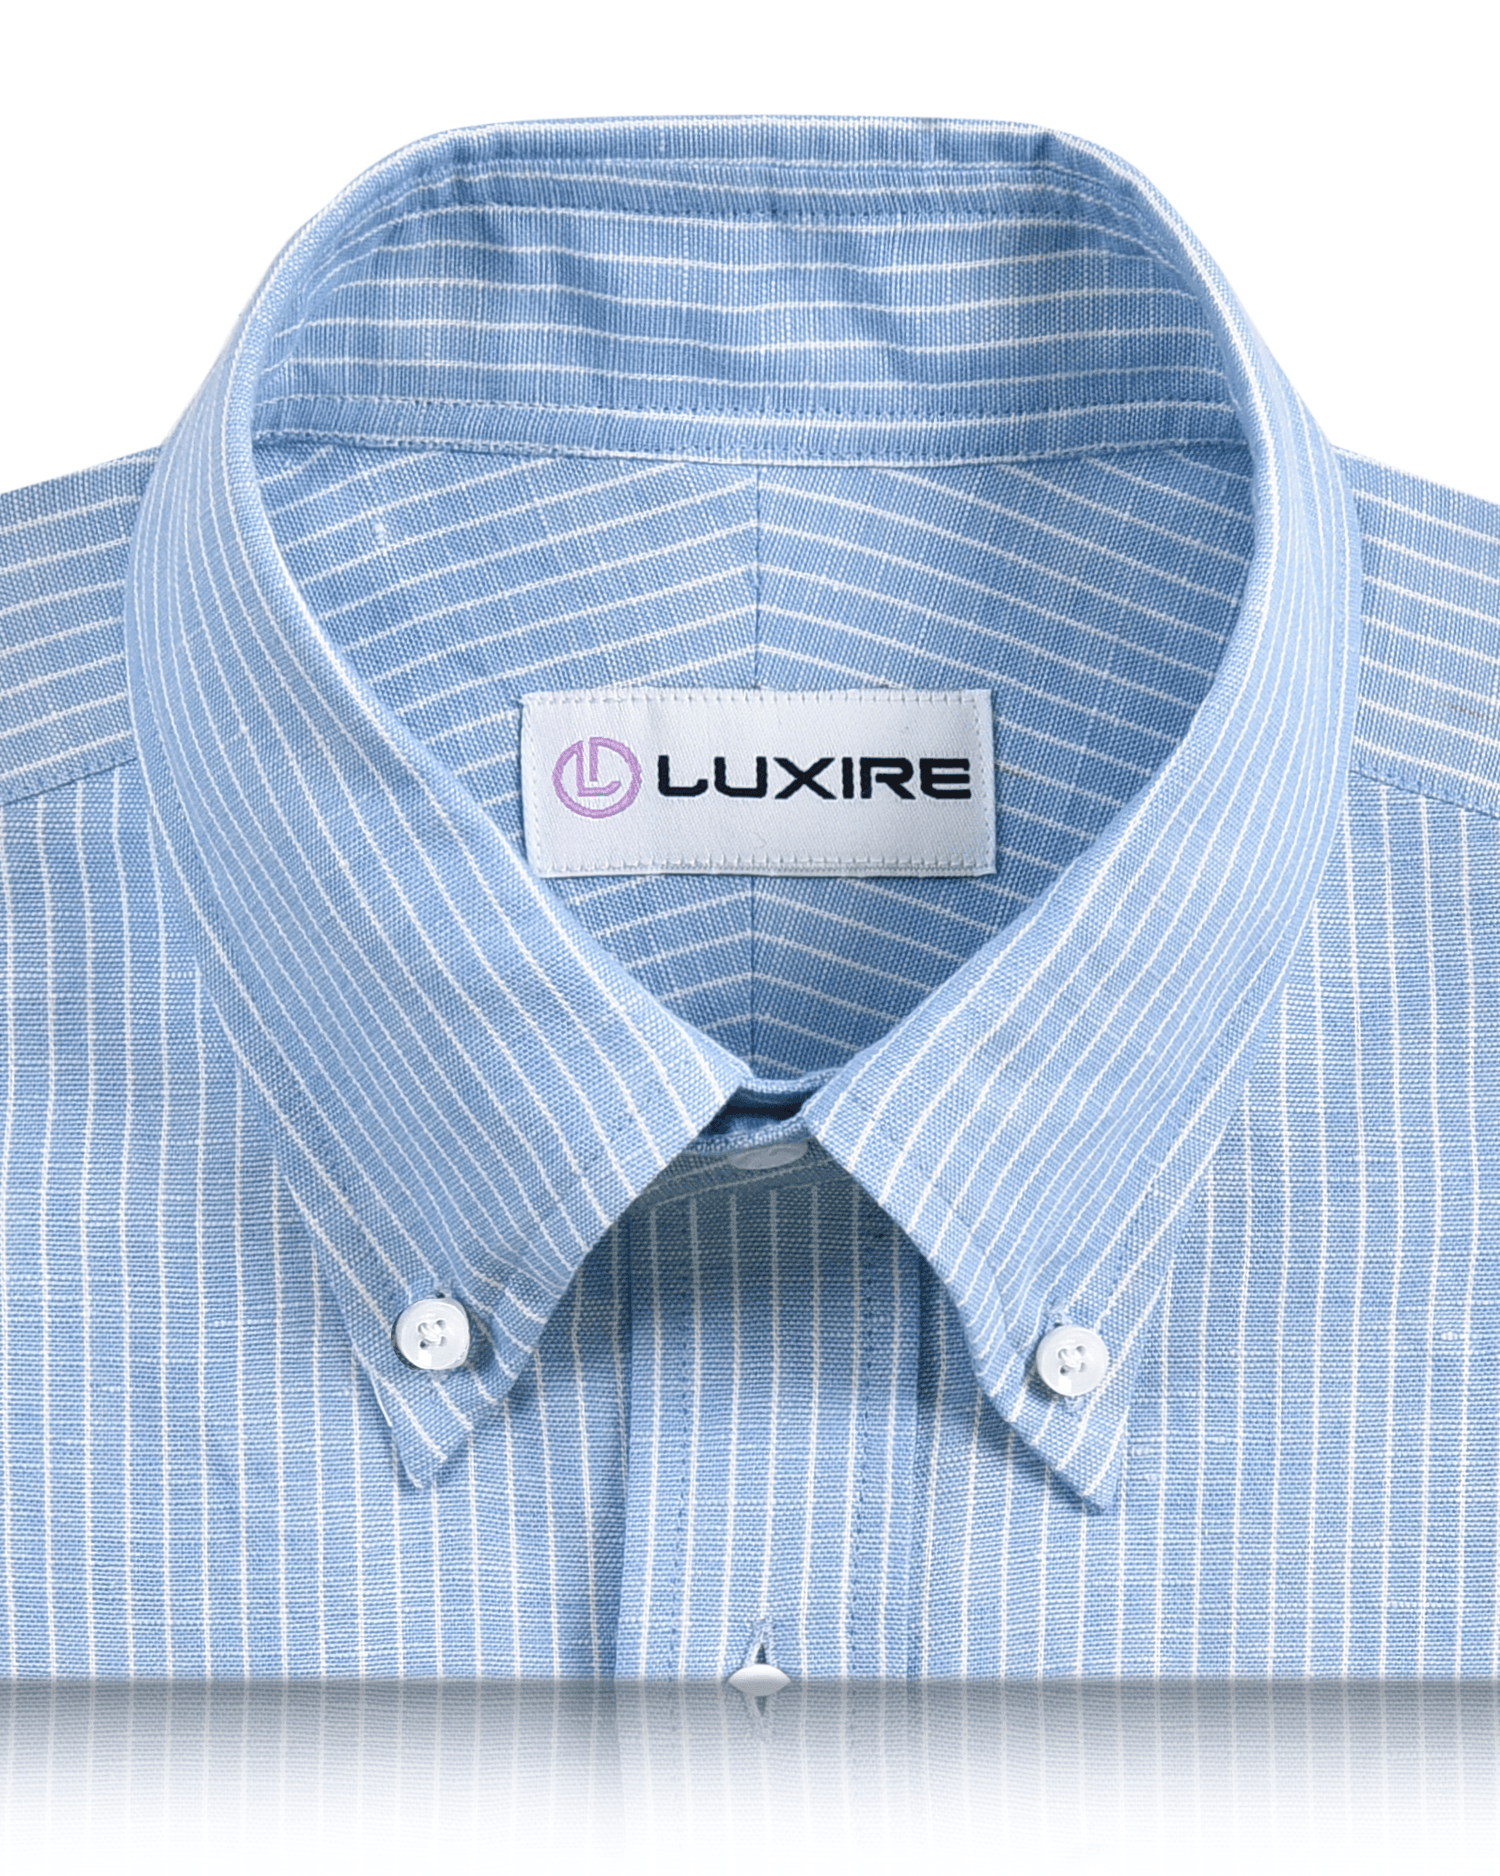 Collar of the custom linen shirt for men in blue with white pinstripes by Luxire Clothing